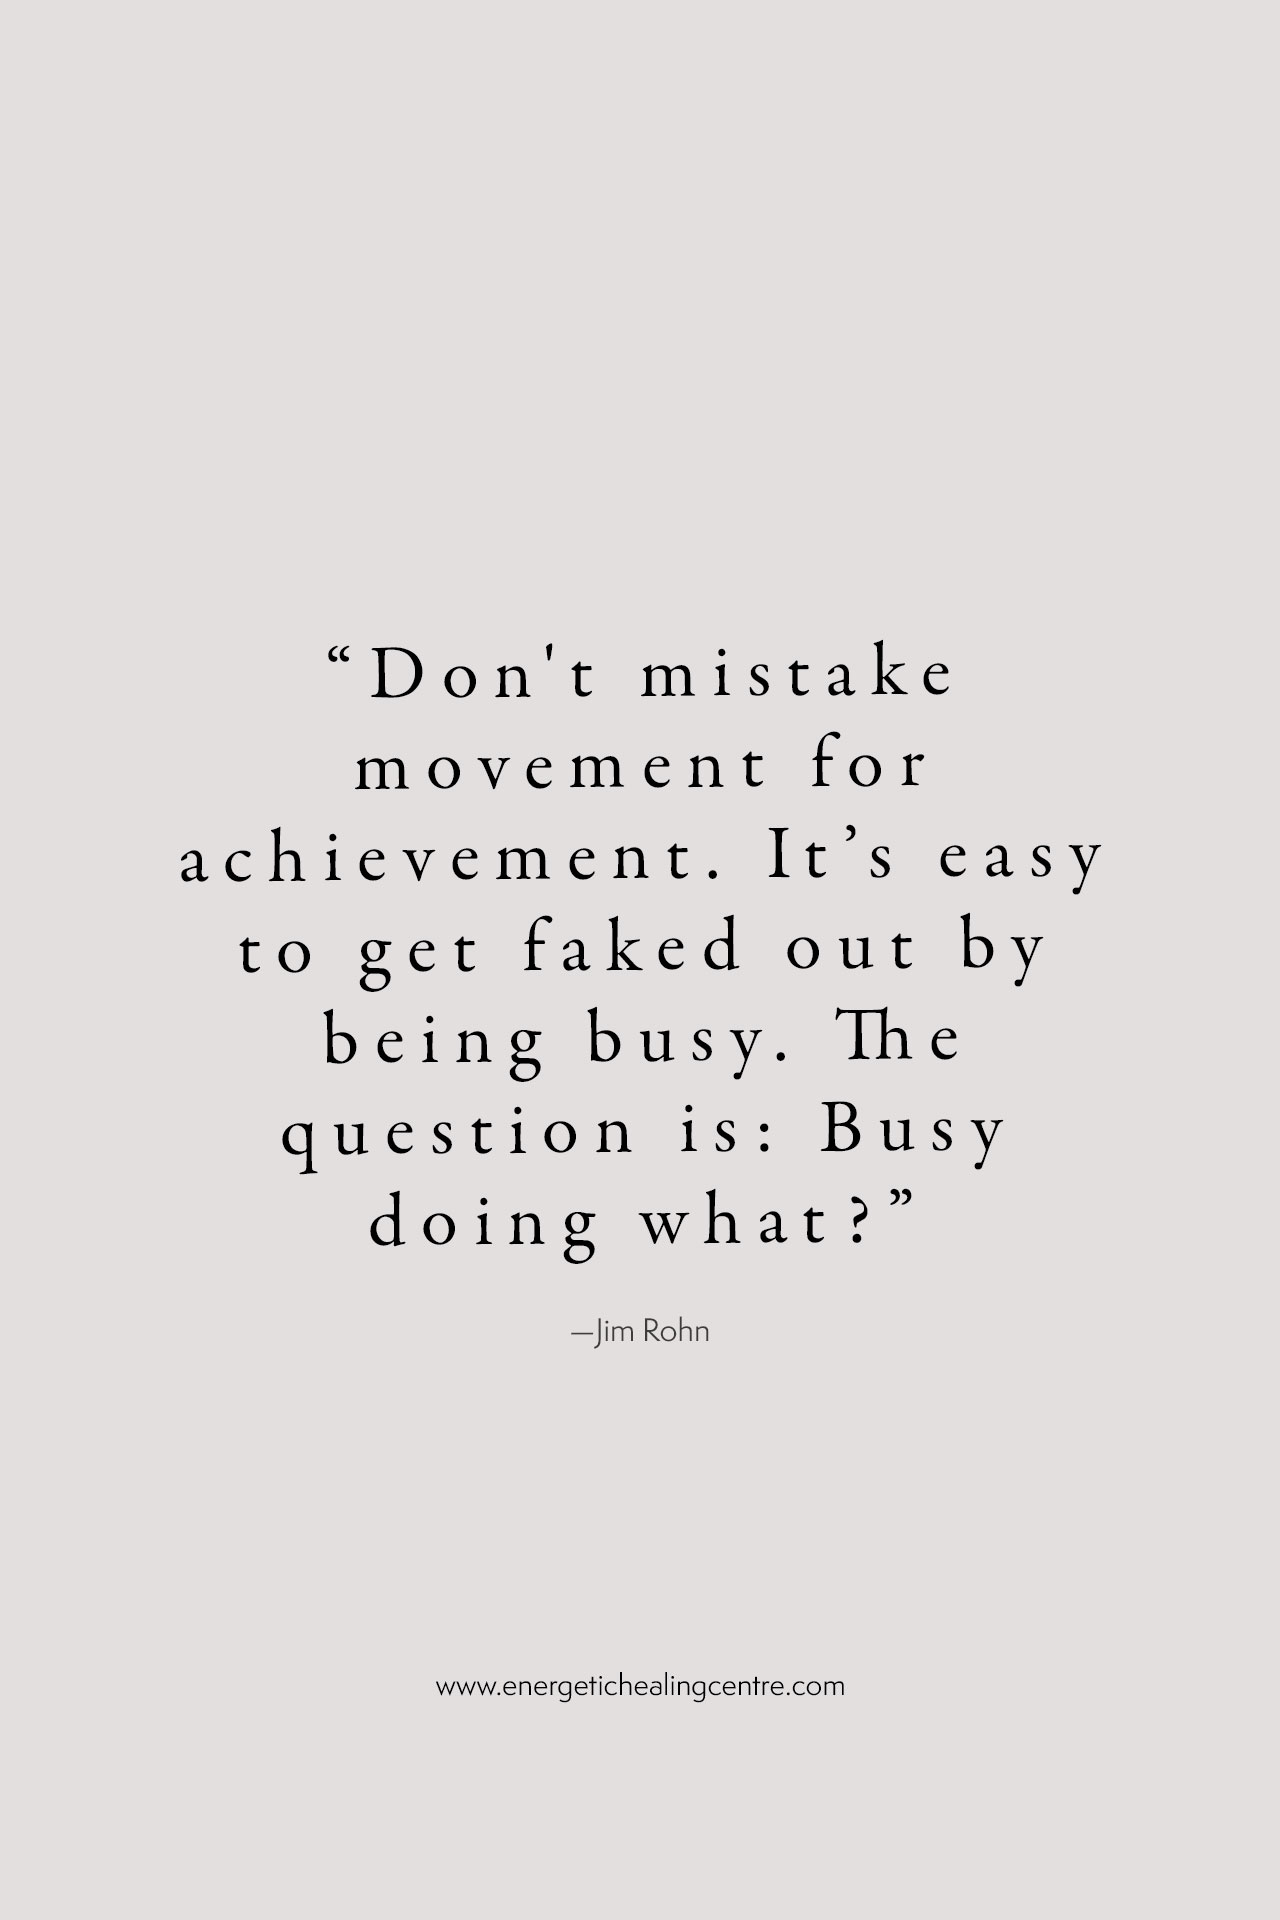 “Don't mistake movement for achievement. It’s easy to get faked out by being busy. The question is: Busy doing what?” –Jim Rohn